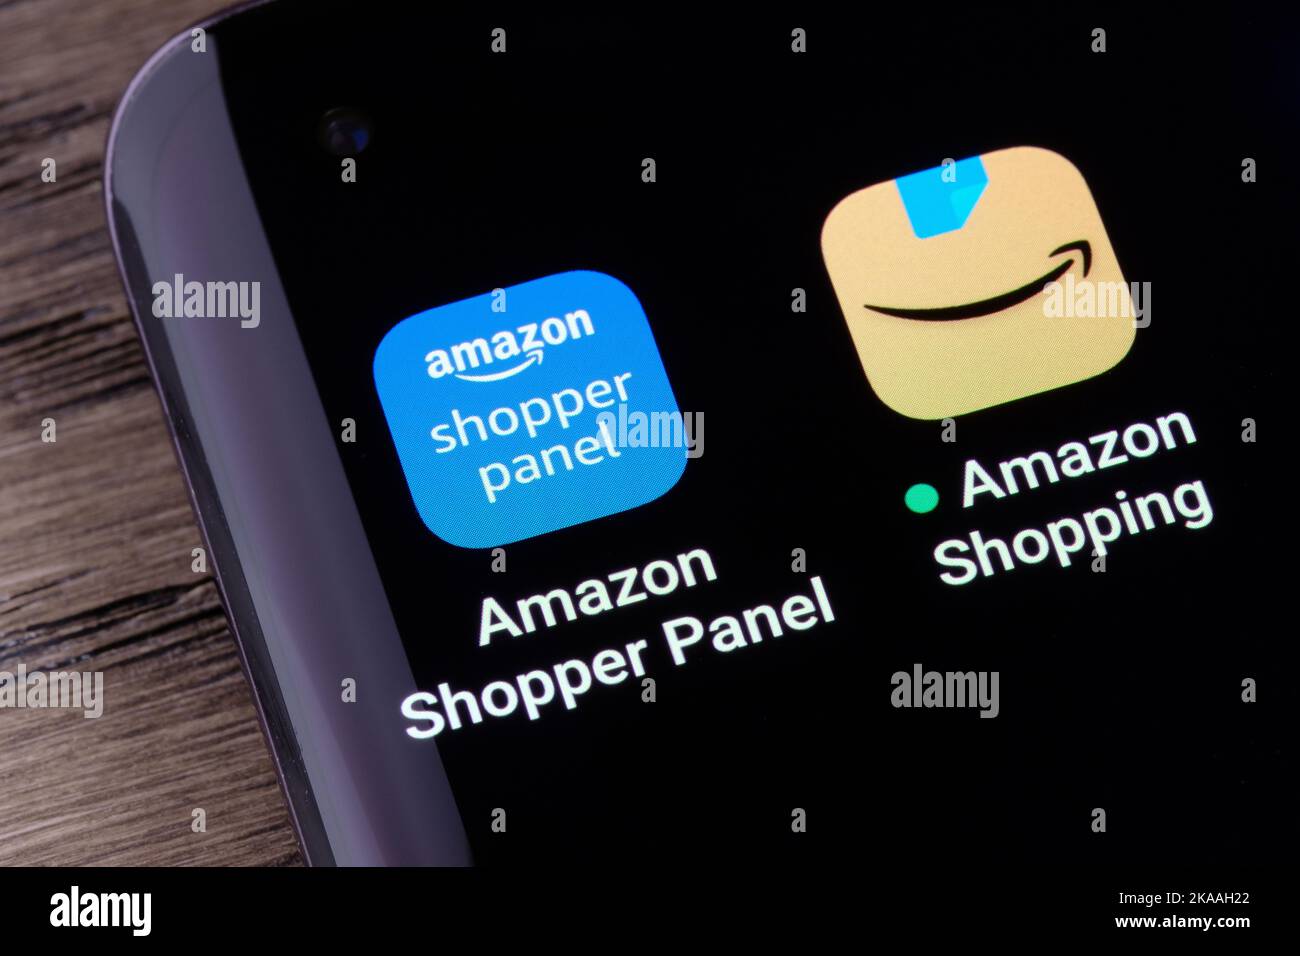 Amazon Shopper Panel and Amazon Shopping apps seen on smartphone screen. Stafford, United Kingdom, October 30, 2022 Stock Photo